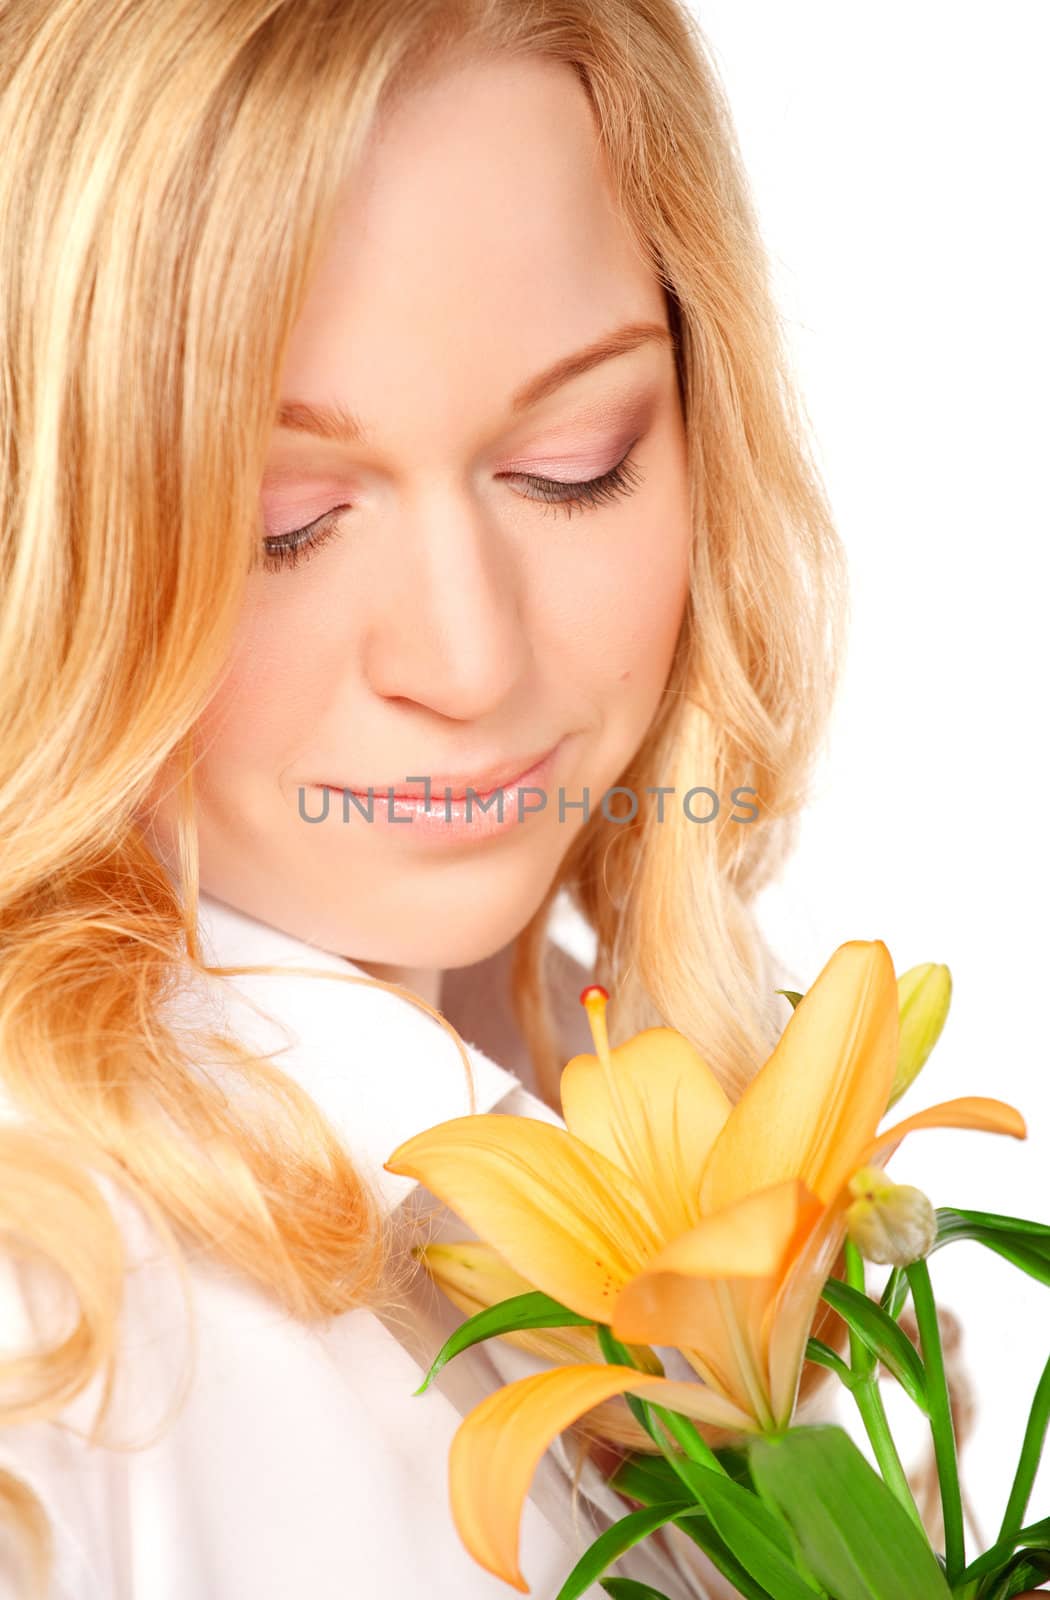 beautiful young woman with lily flower, close-up portrait